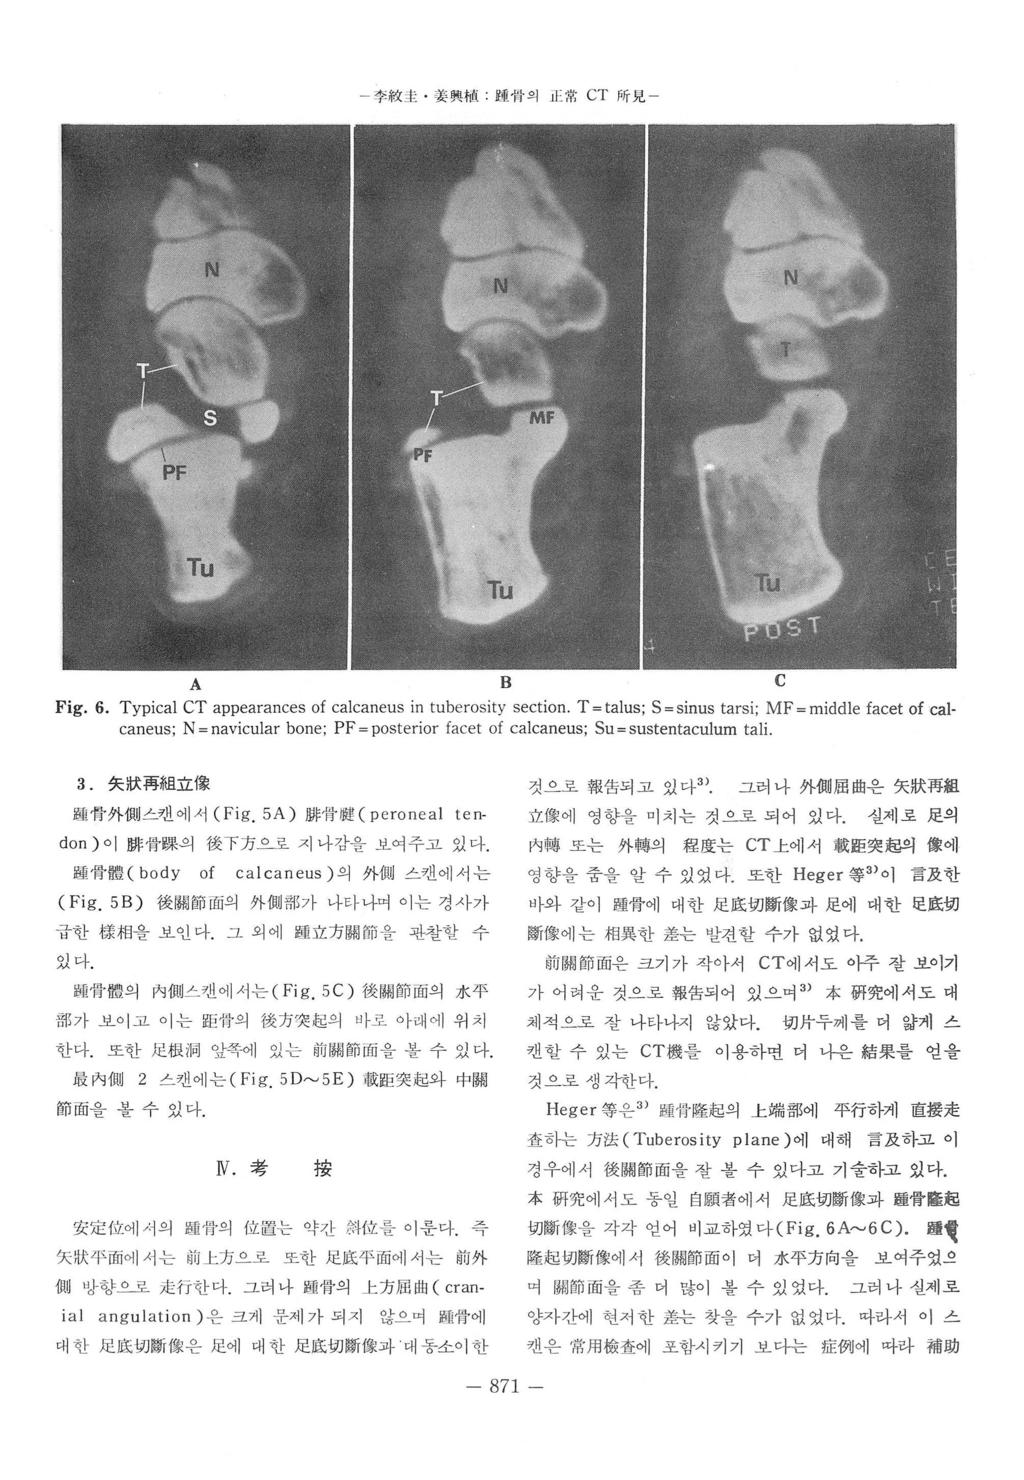 - 주救초 쫓興뼈 K 명 fi 의 ie 힘 CT JiJj- 見 - A C Fig. 6. Typical CT appearances of cajcaneus in tuberosity section.